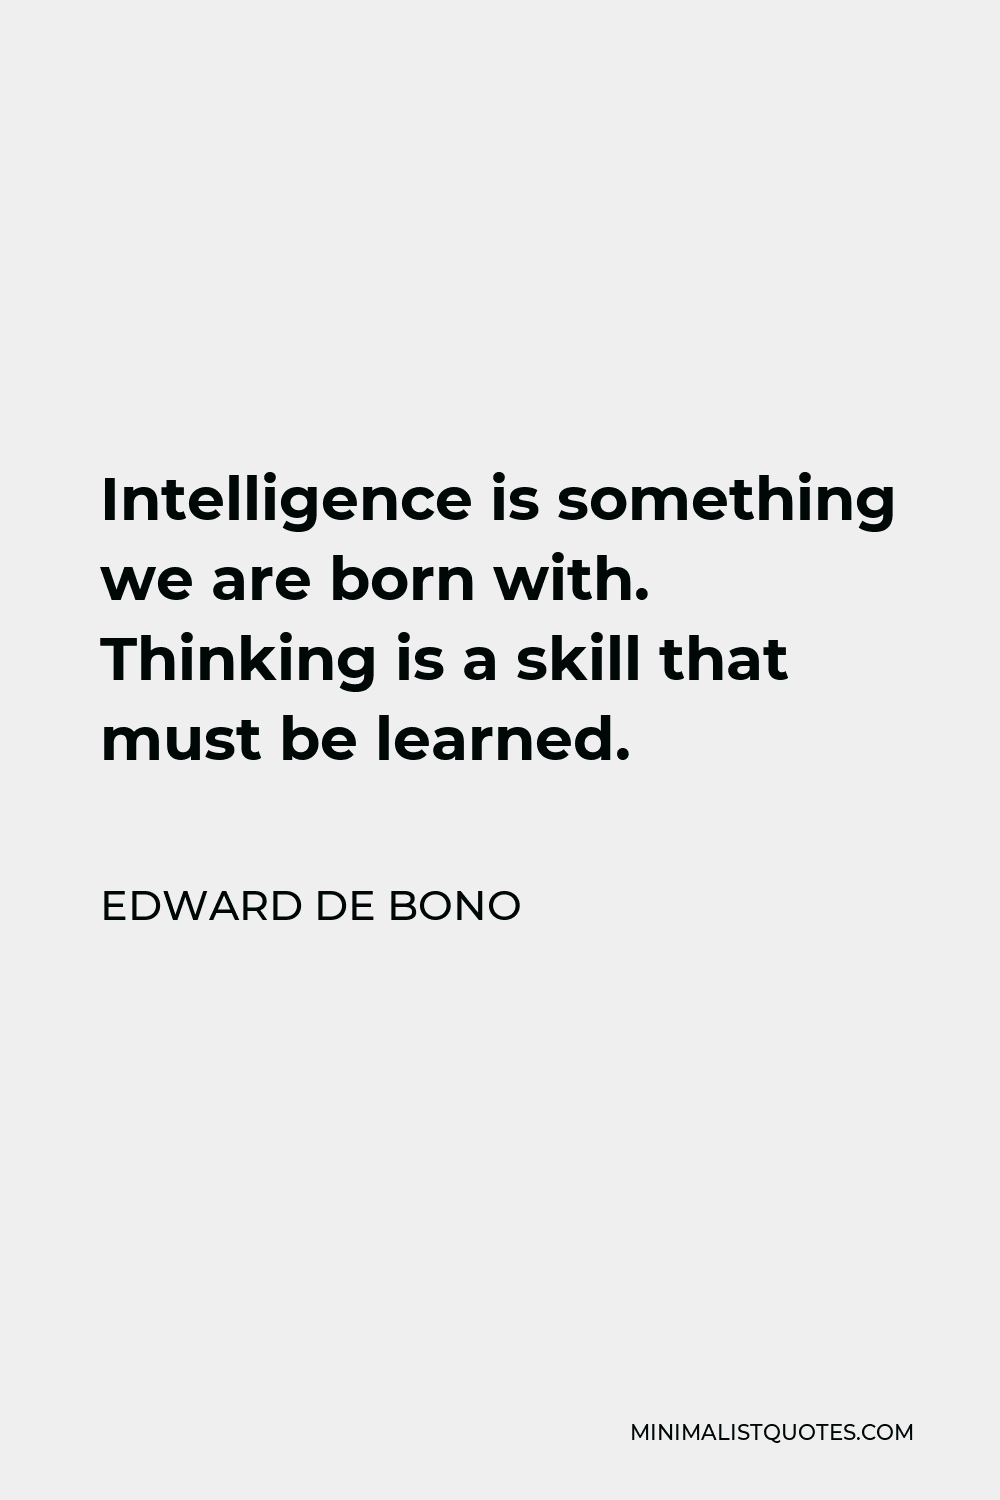 Edward de Bono Quote - Intelligence is something we are born with. Thinking is a skill that must be learned.